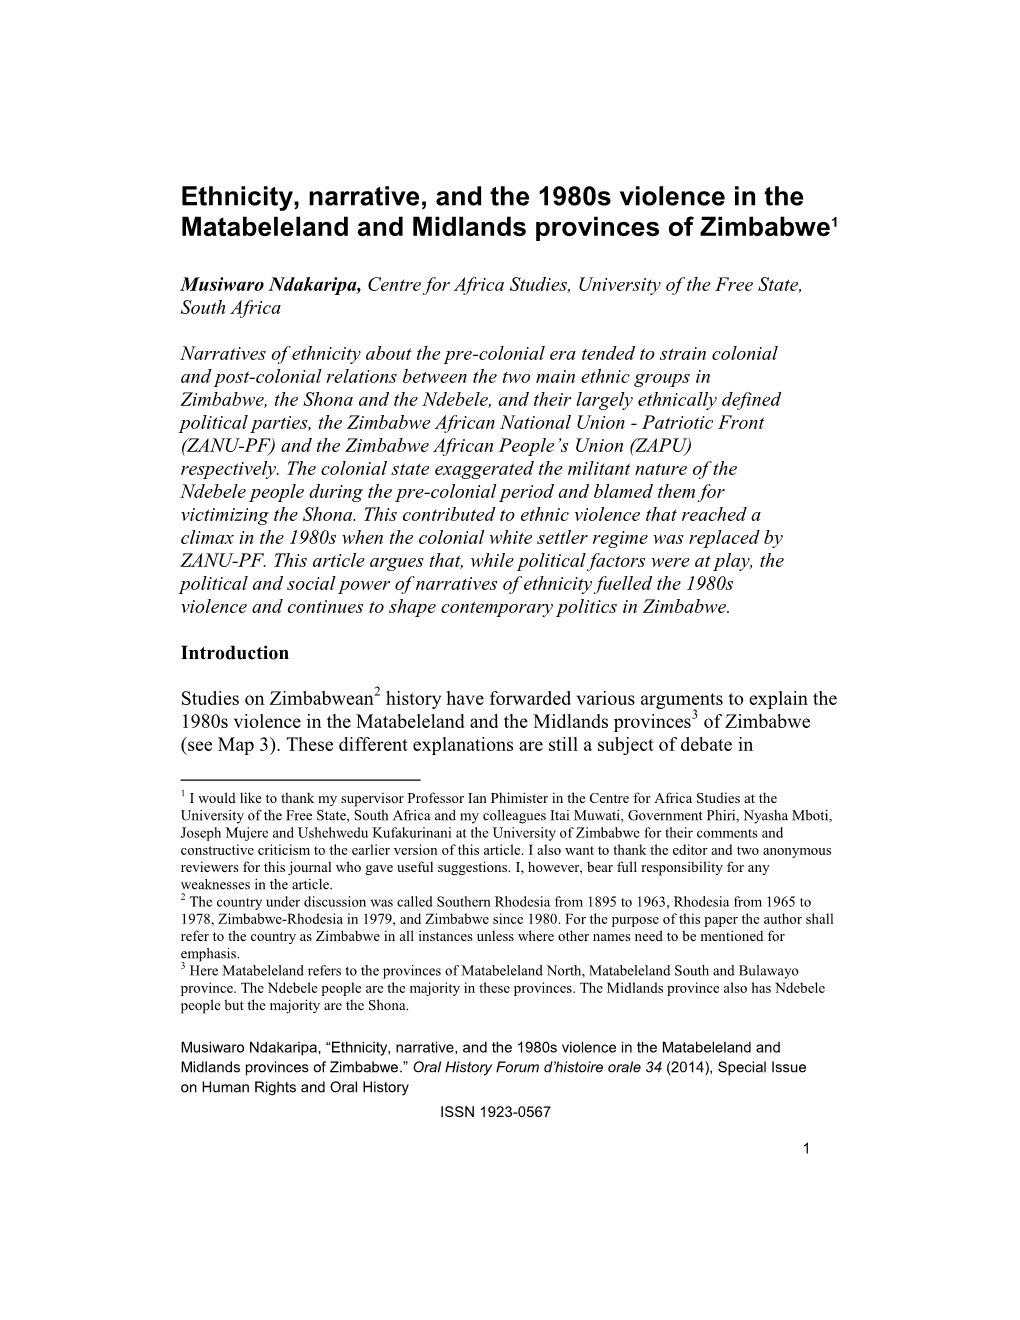 Ethnicity, Narrative, and the 1980S Violence in the Matabeleland and Midlands Provinces of Zimbabwe1